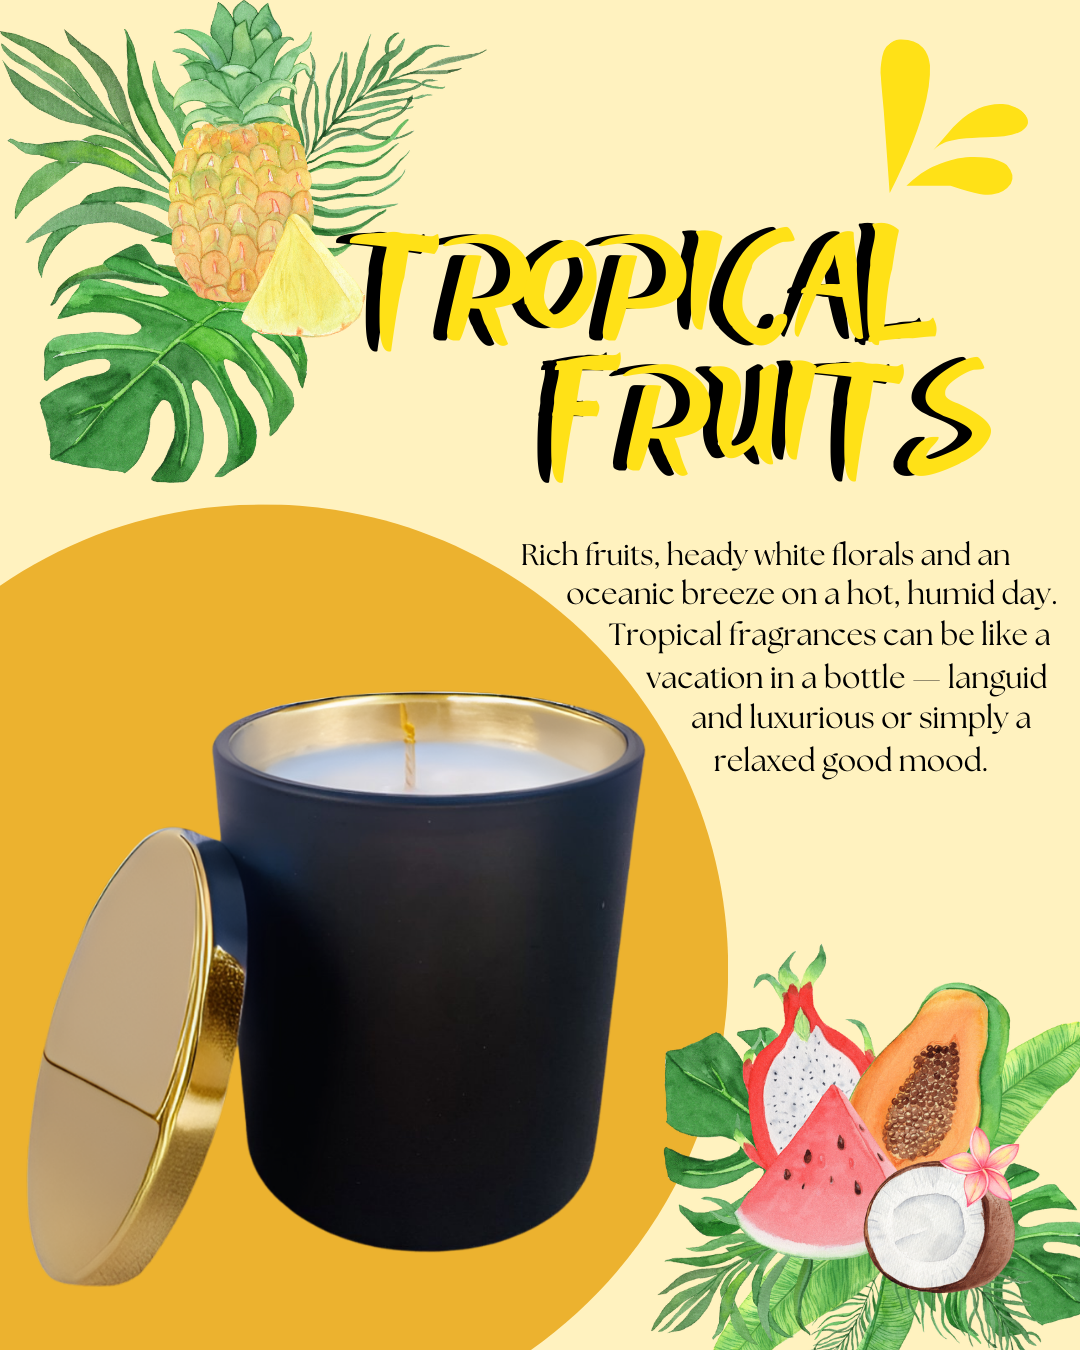 Tropical Fruit Candle